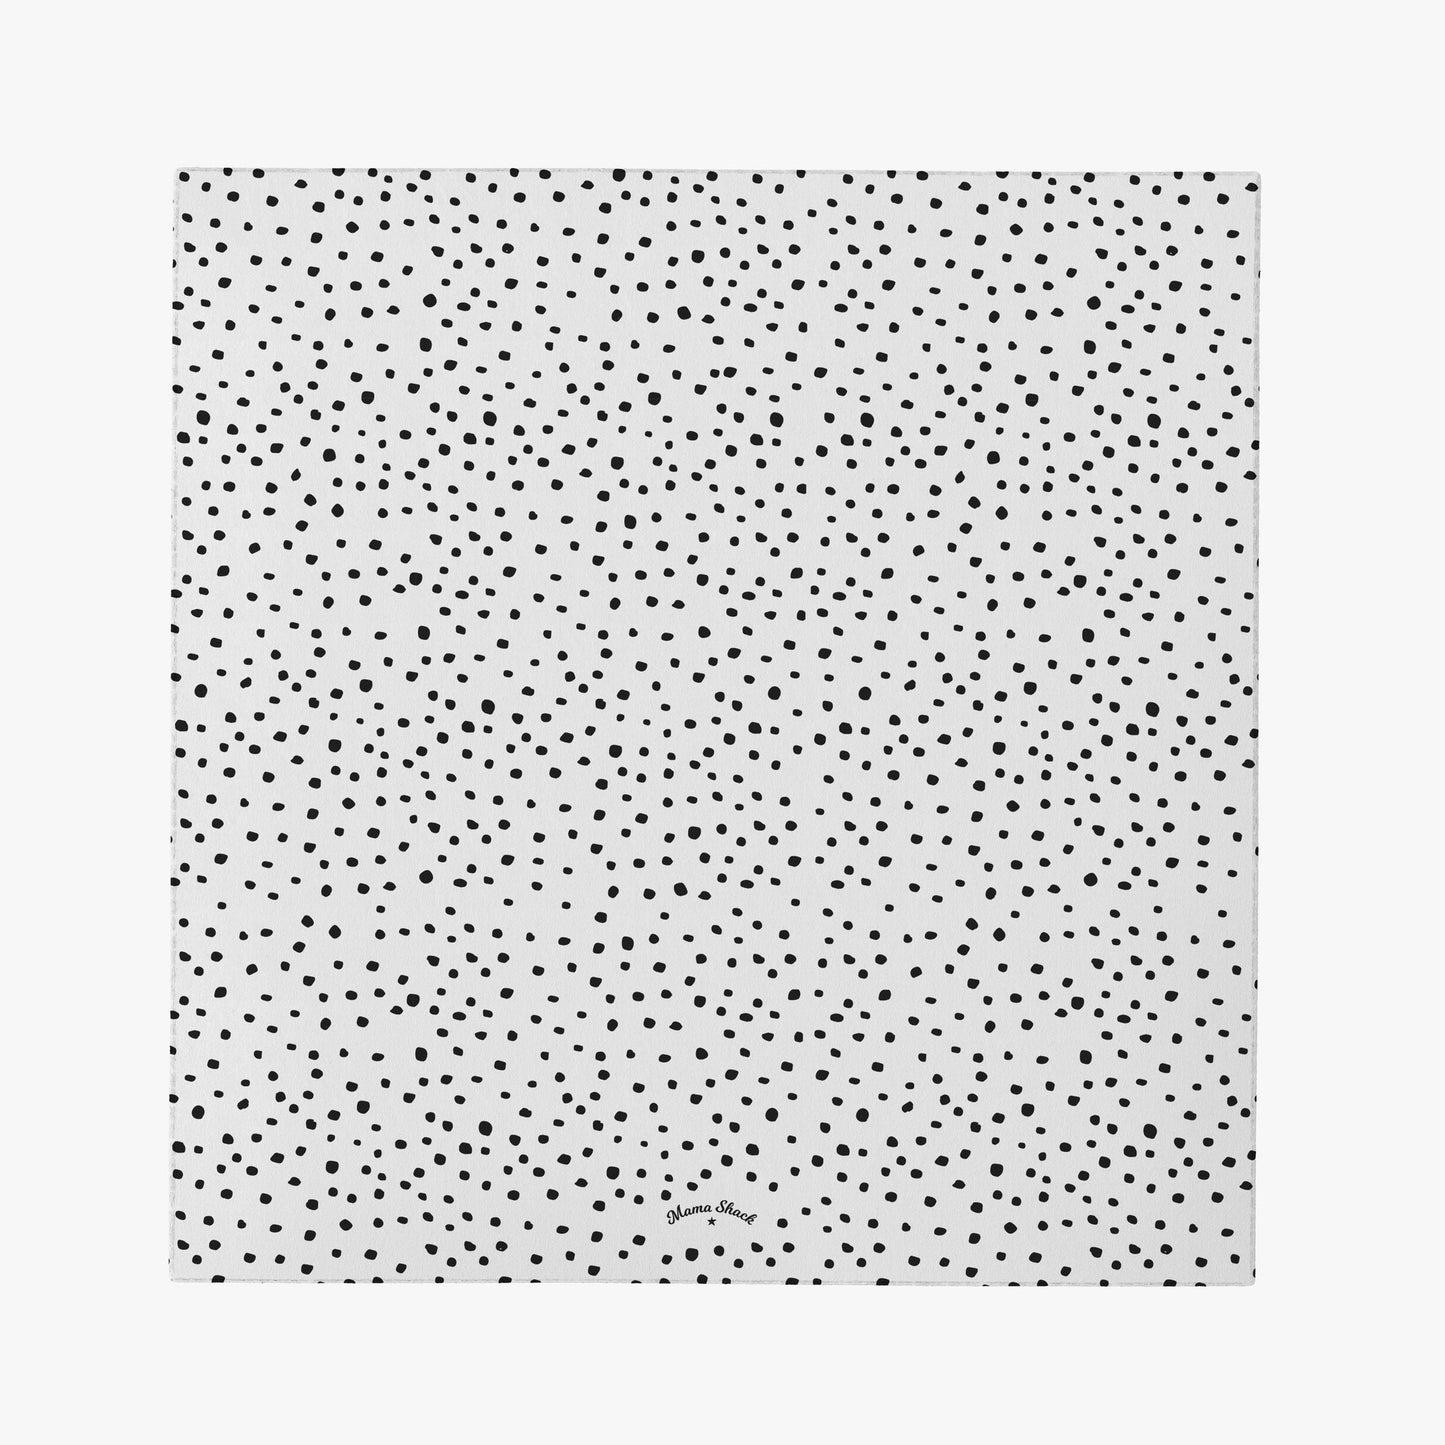 The mama Shack Dotty Splashmat is a available at Alf & Co, The Children’s independent  